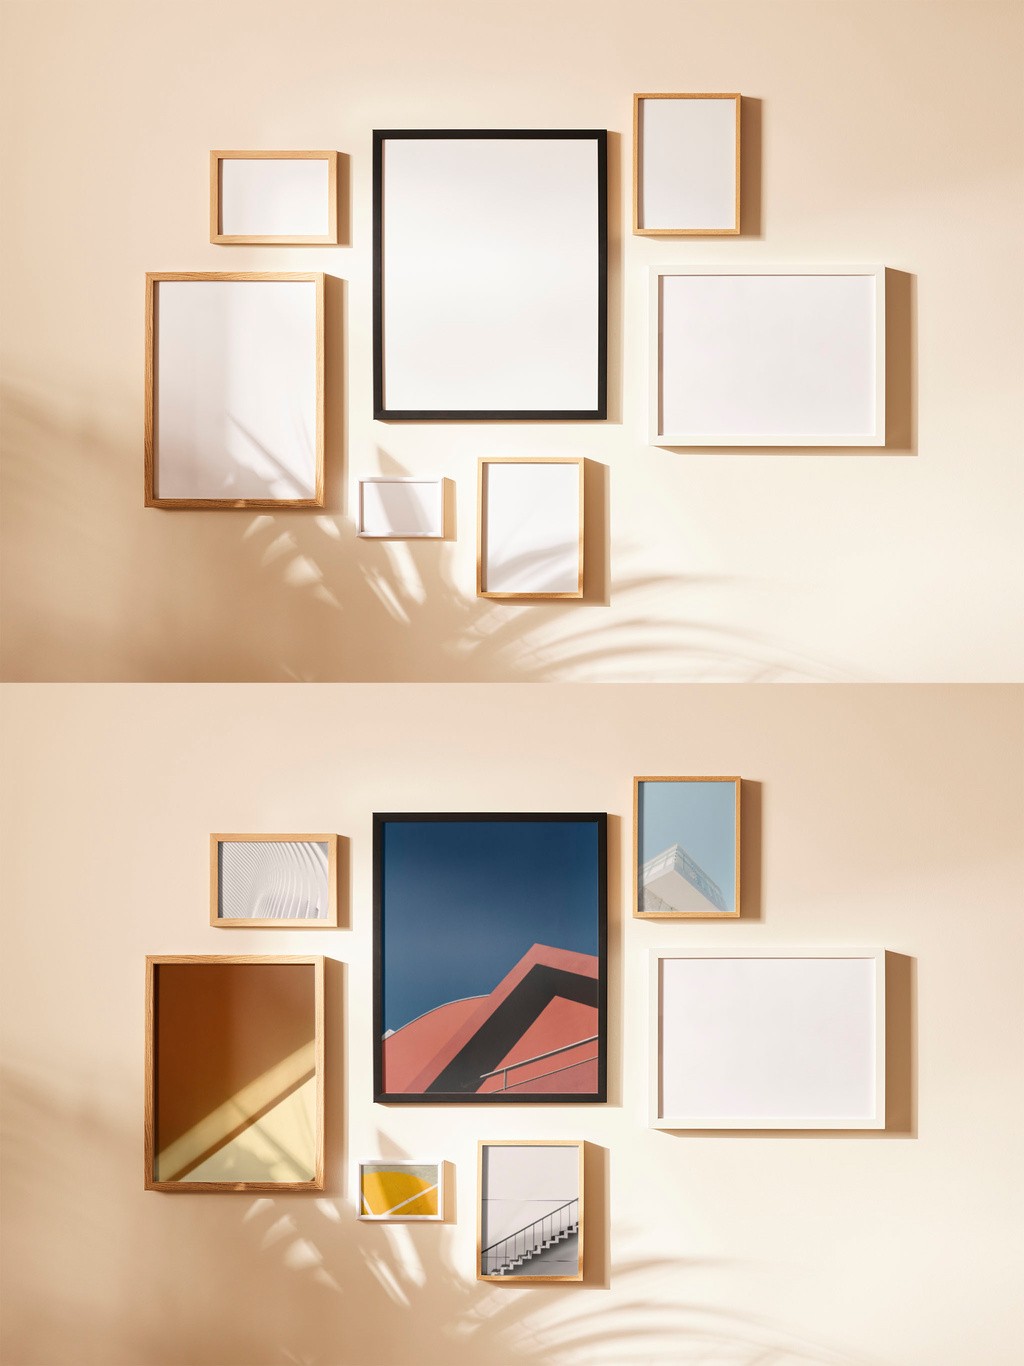 Photo Frame Gallery Wall Mockup featuring a collection of wooden photo frames arranged on a wall, showcasing art, photos, and products in a realistic gallery setting.